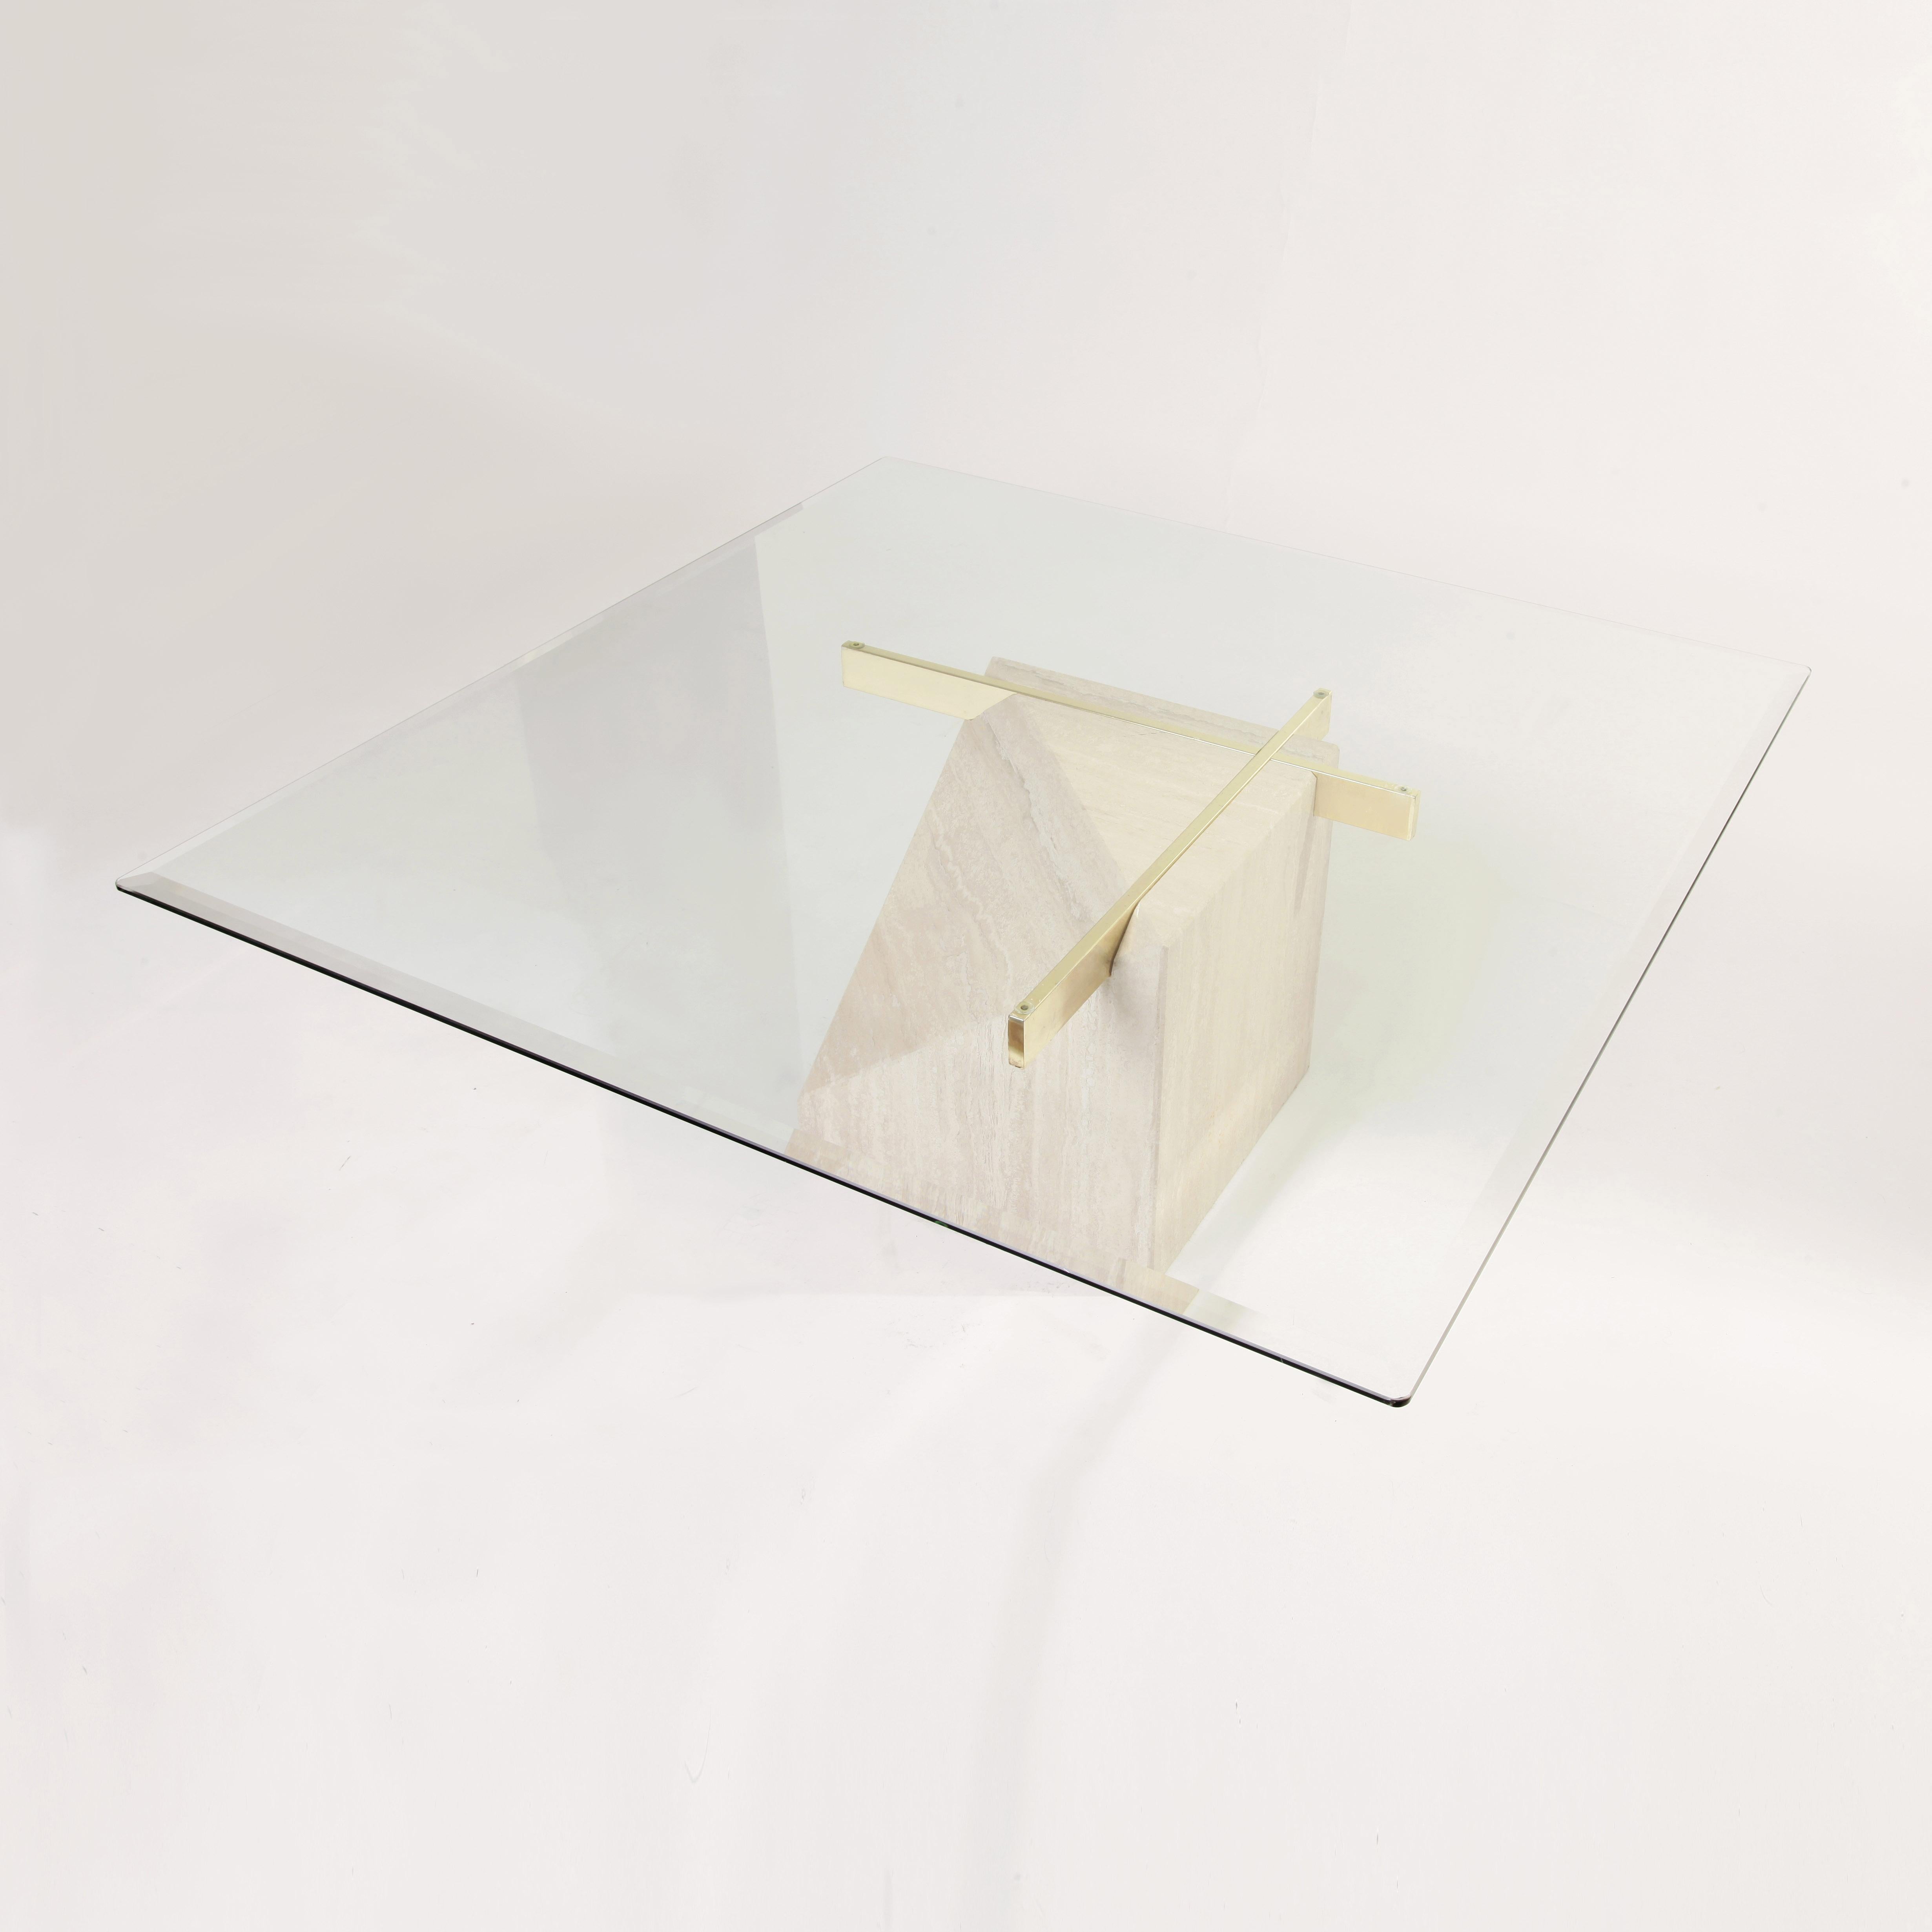 1970s coffee table designed and manufactured by Artedi, Italy. Travertine base with brass plated metal support. Clear square glass top. Wear consistent with age and use. Possible small chip on the travertine. Please note, the actual table on the